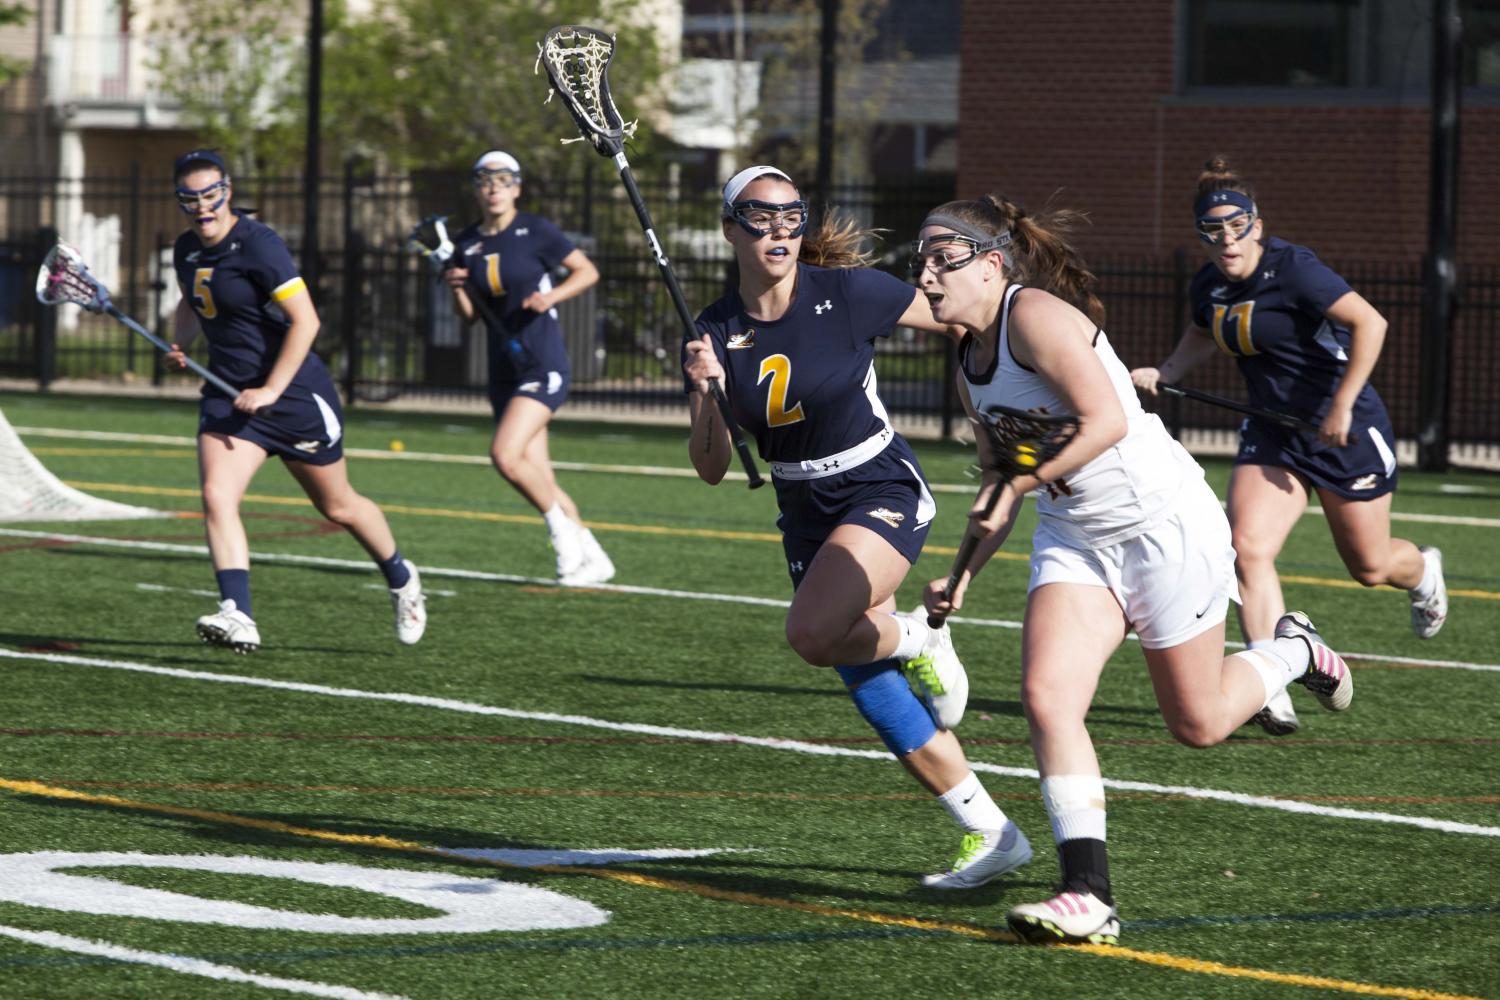 Sophomore midfielder Jenna Butler races past an Allegheny College defender in the NCAC Semifinals last Wednesday. The Yeowomen defeated the Gators 13–8 to secure a spot in the NCAC Championship for the second time in the past three years.